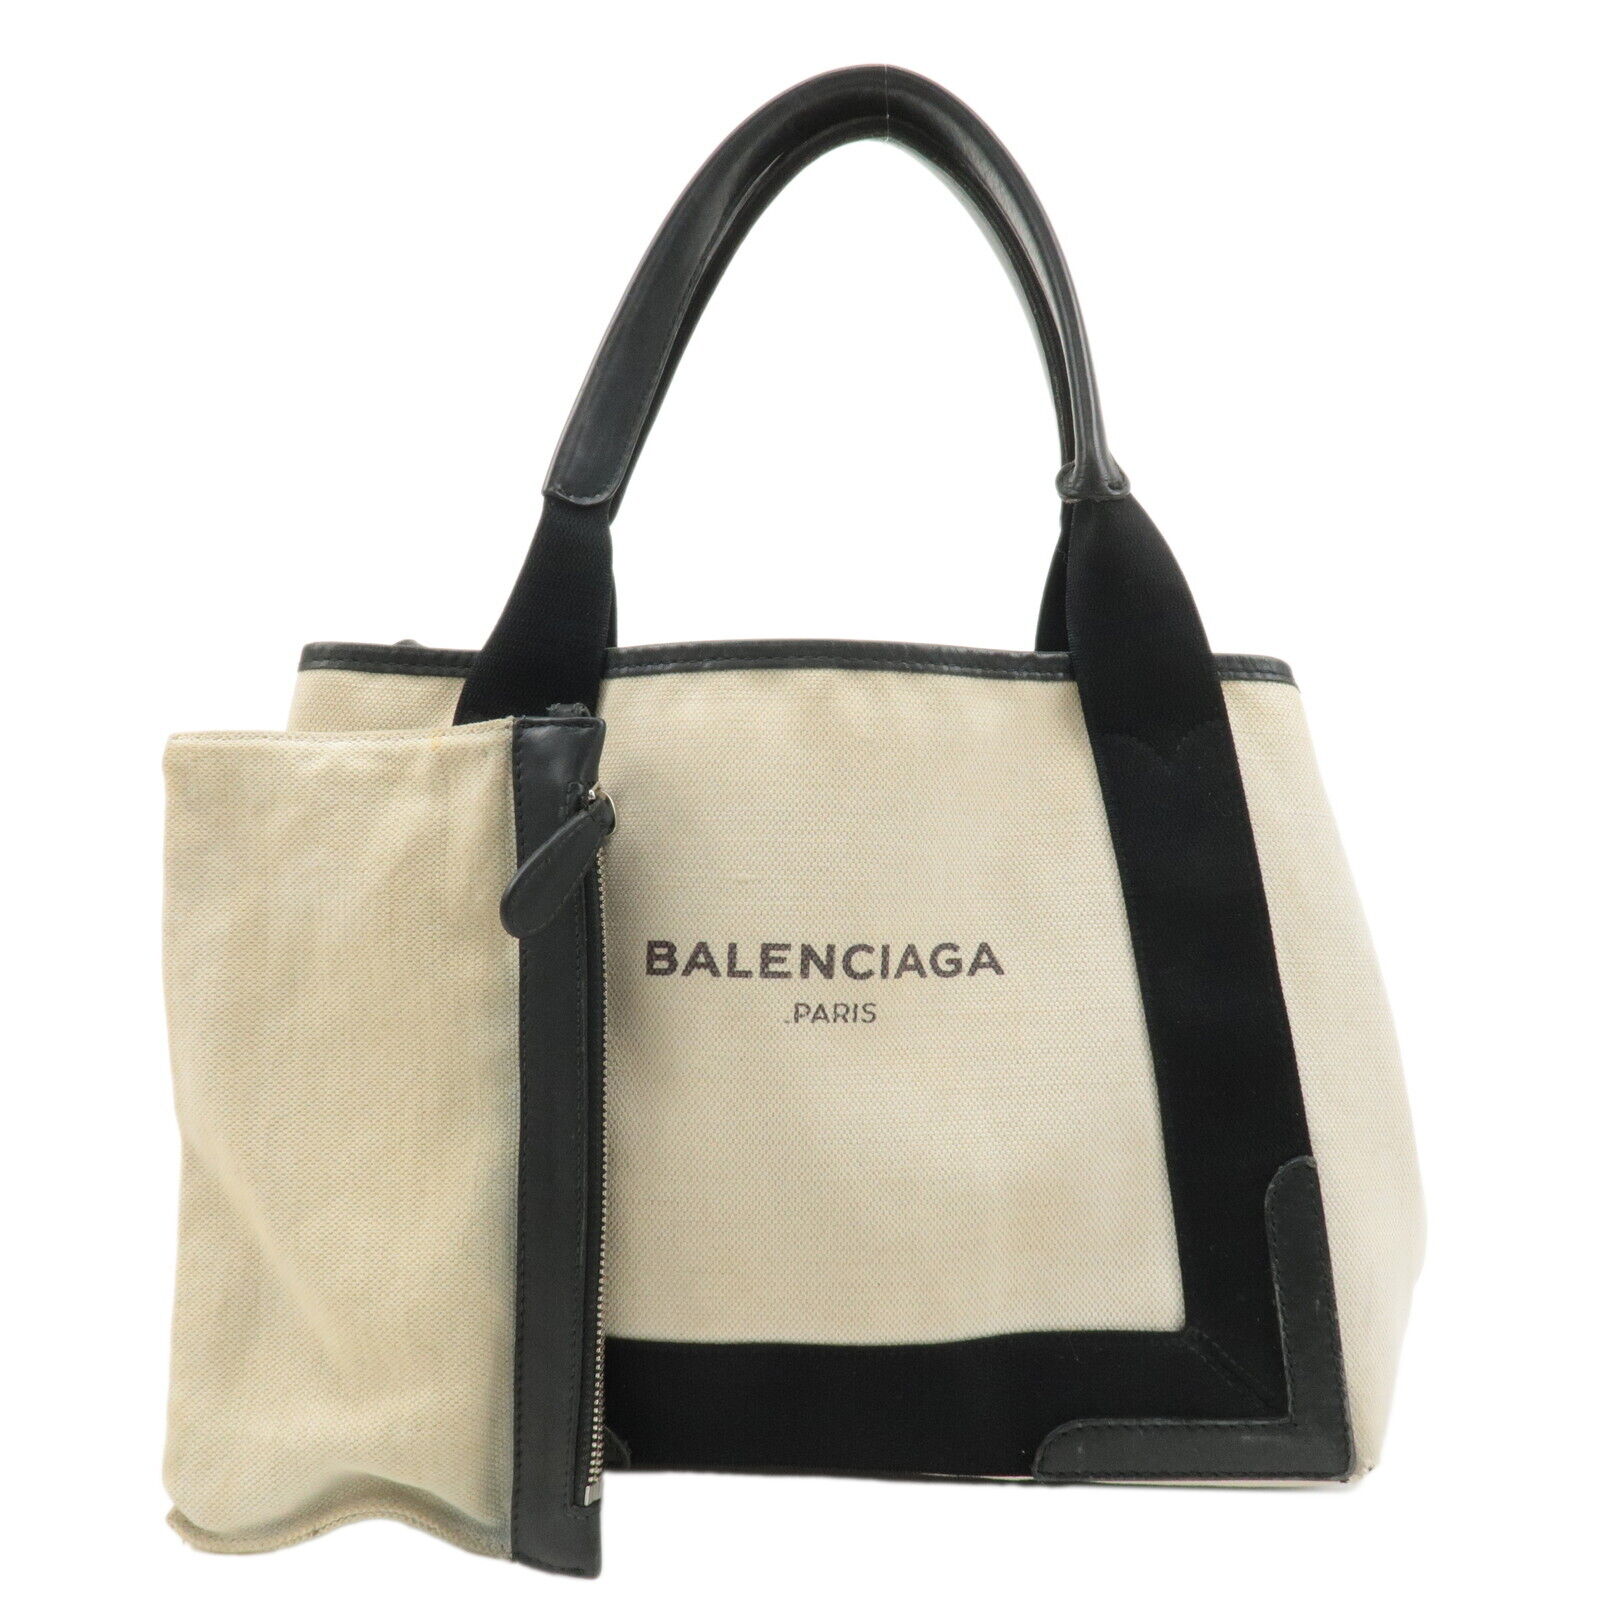 Auth BALENCIAGA Canvas Leather Navy Cabas S Tote Bag Ivory Black 339933 Used F/S